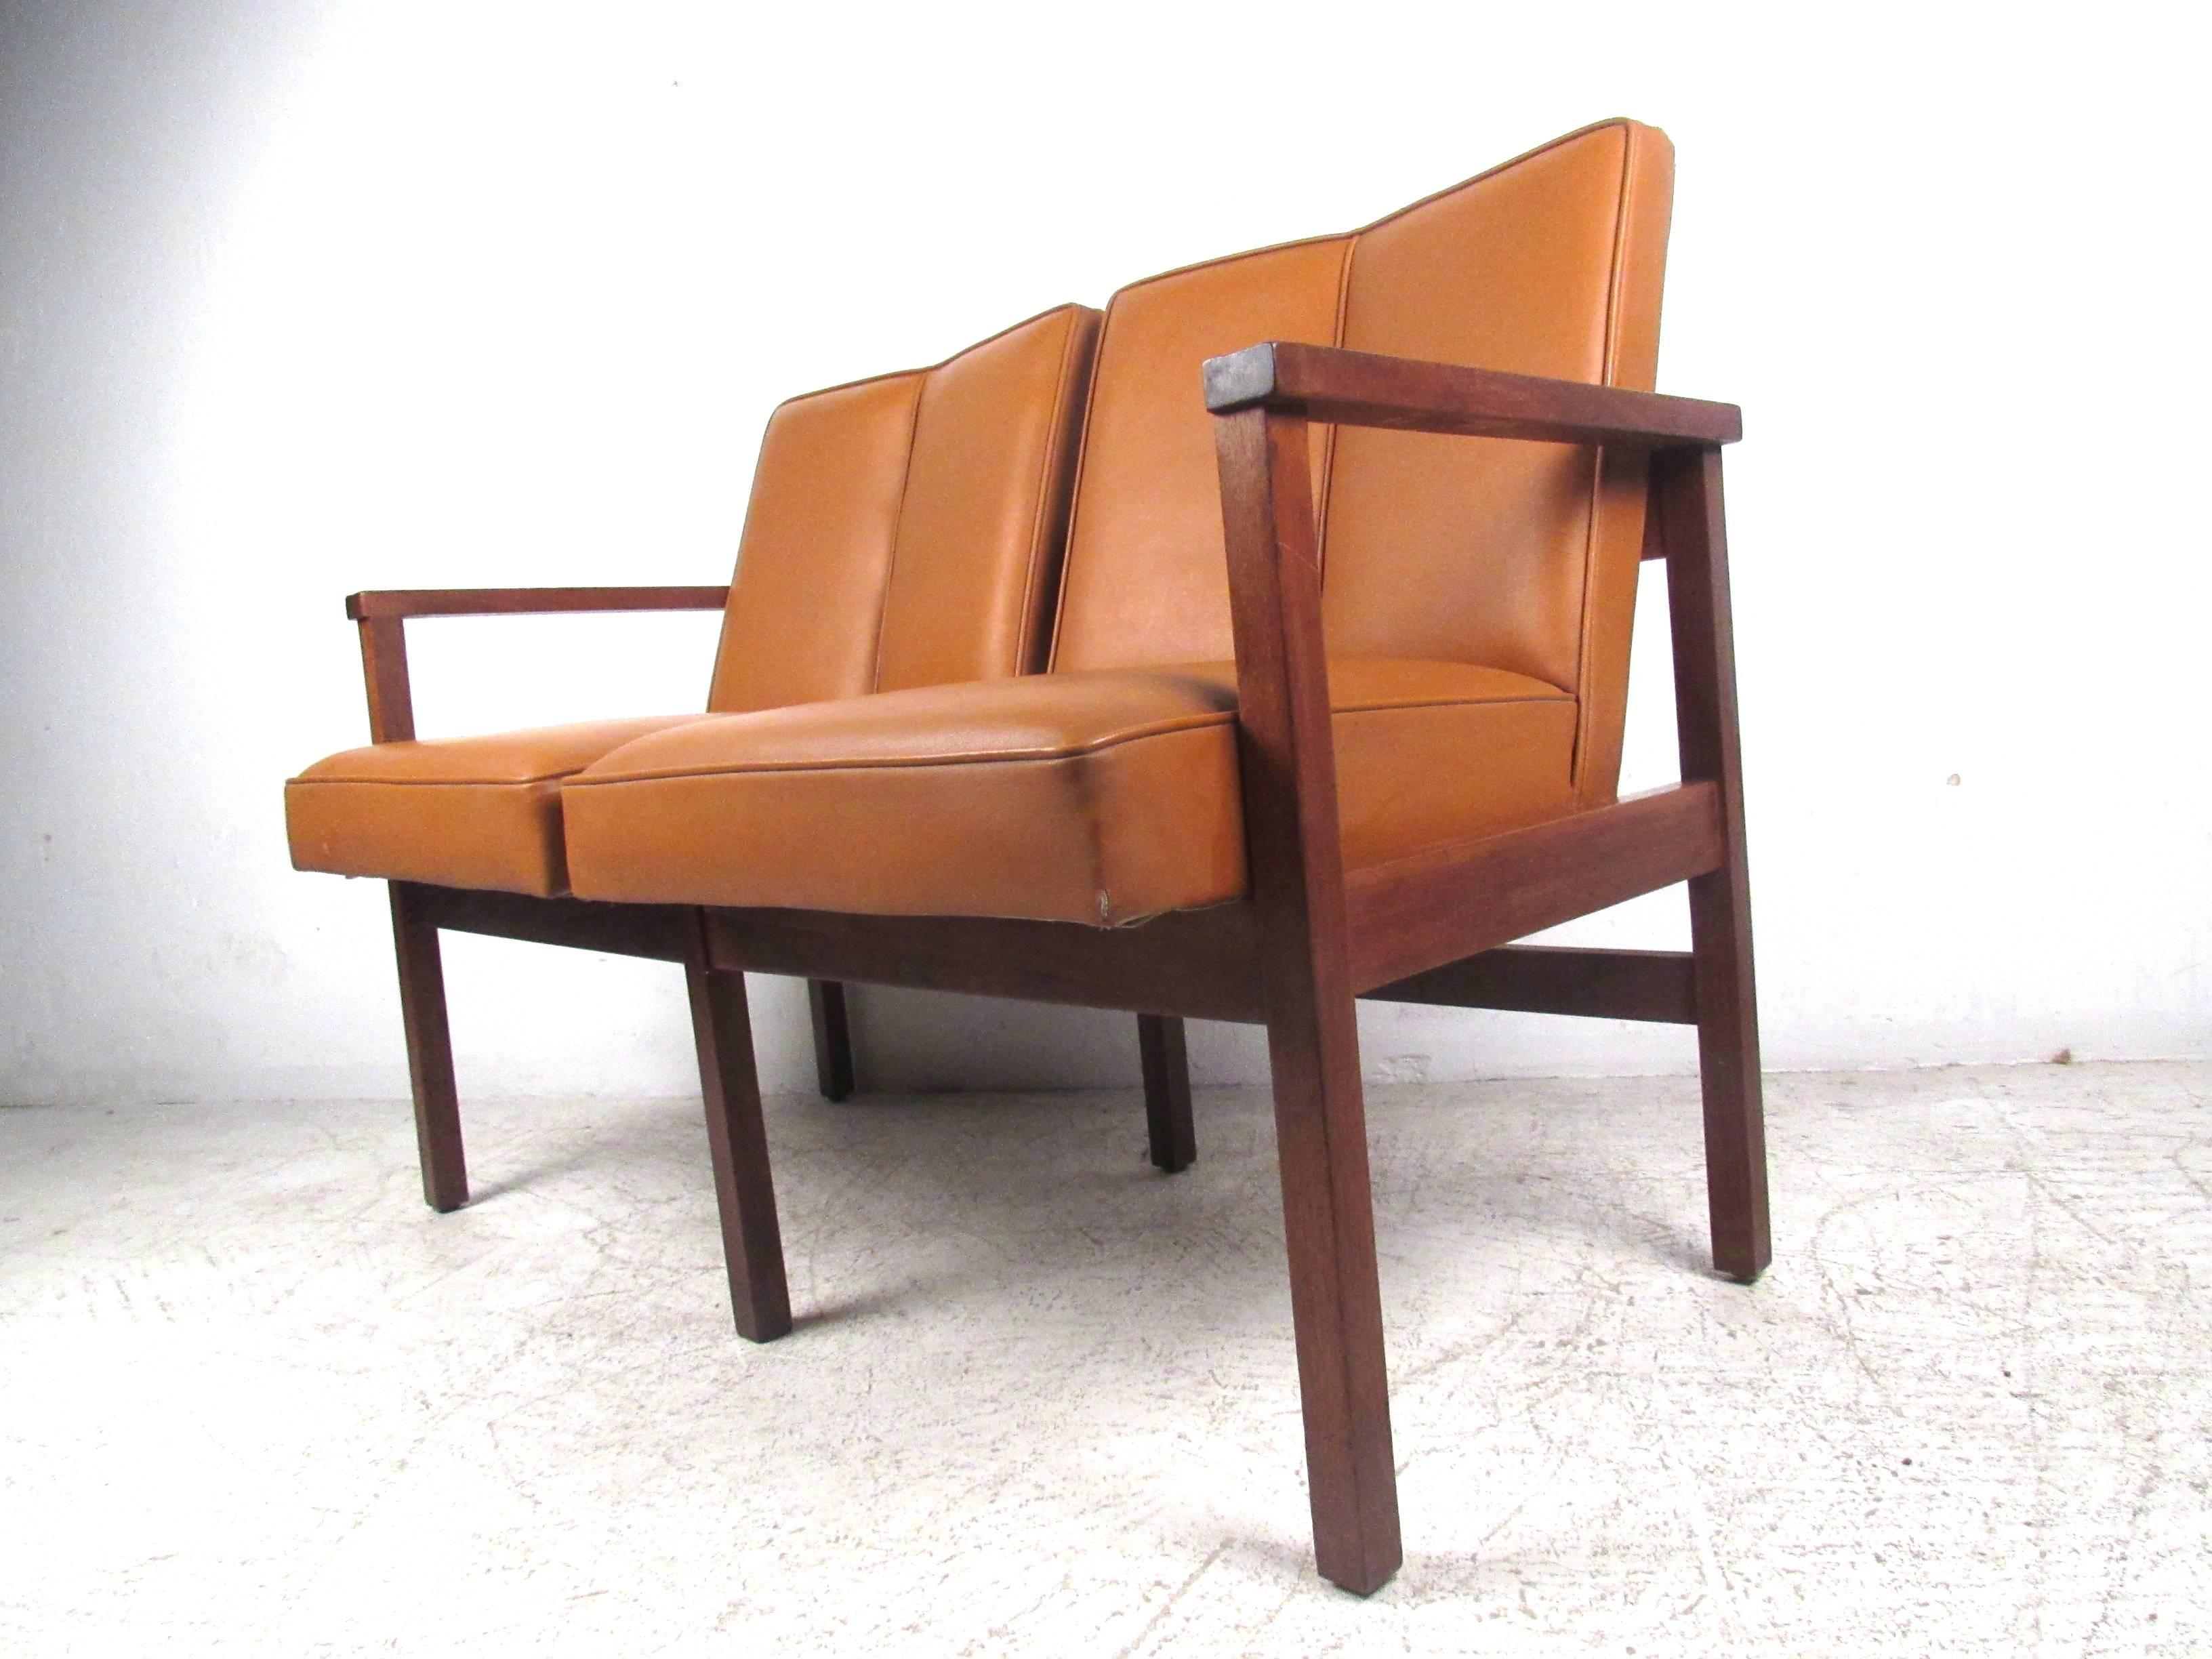 Late 20th Century Mid-Century Modern Vinyl and Walnut Settee For Sale